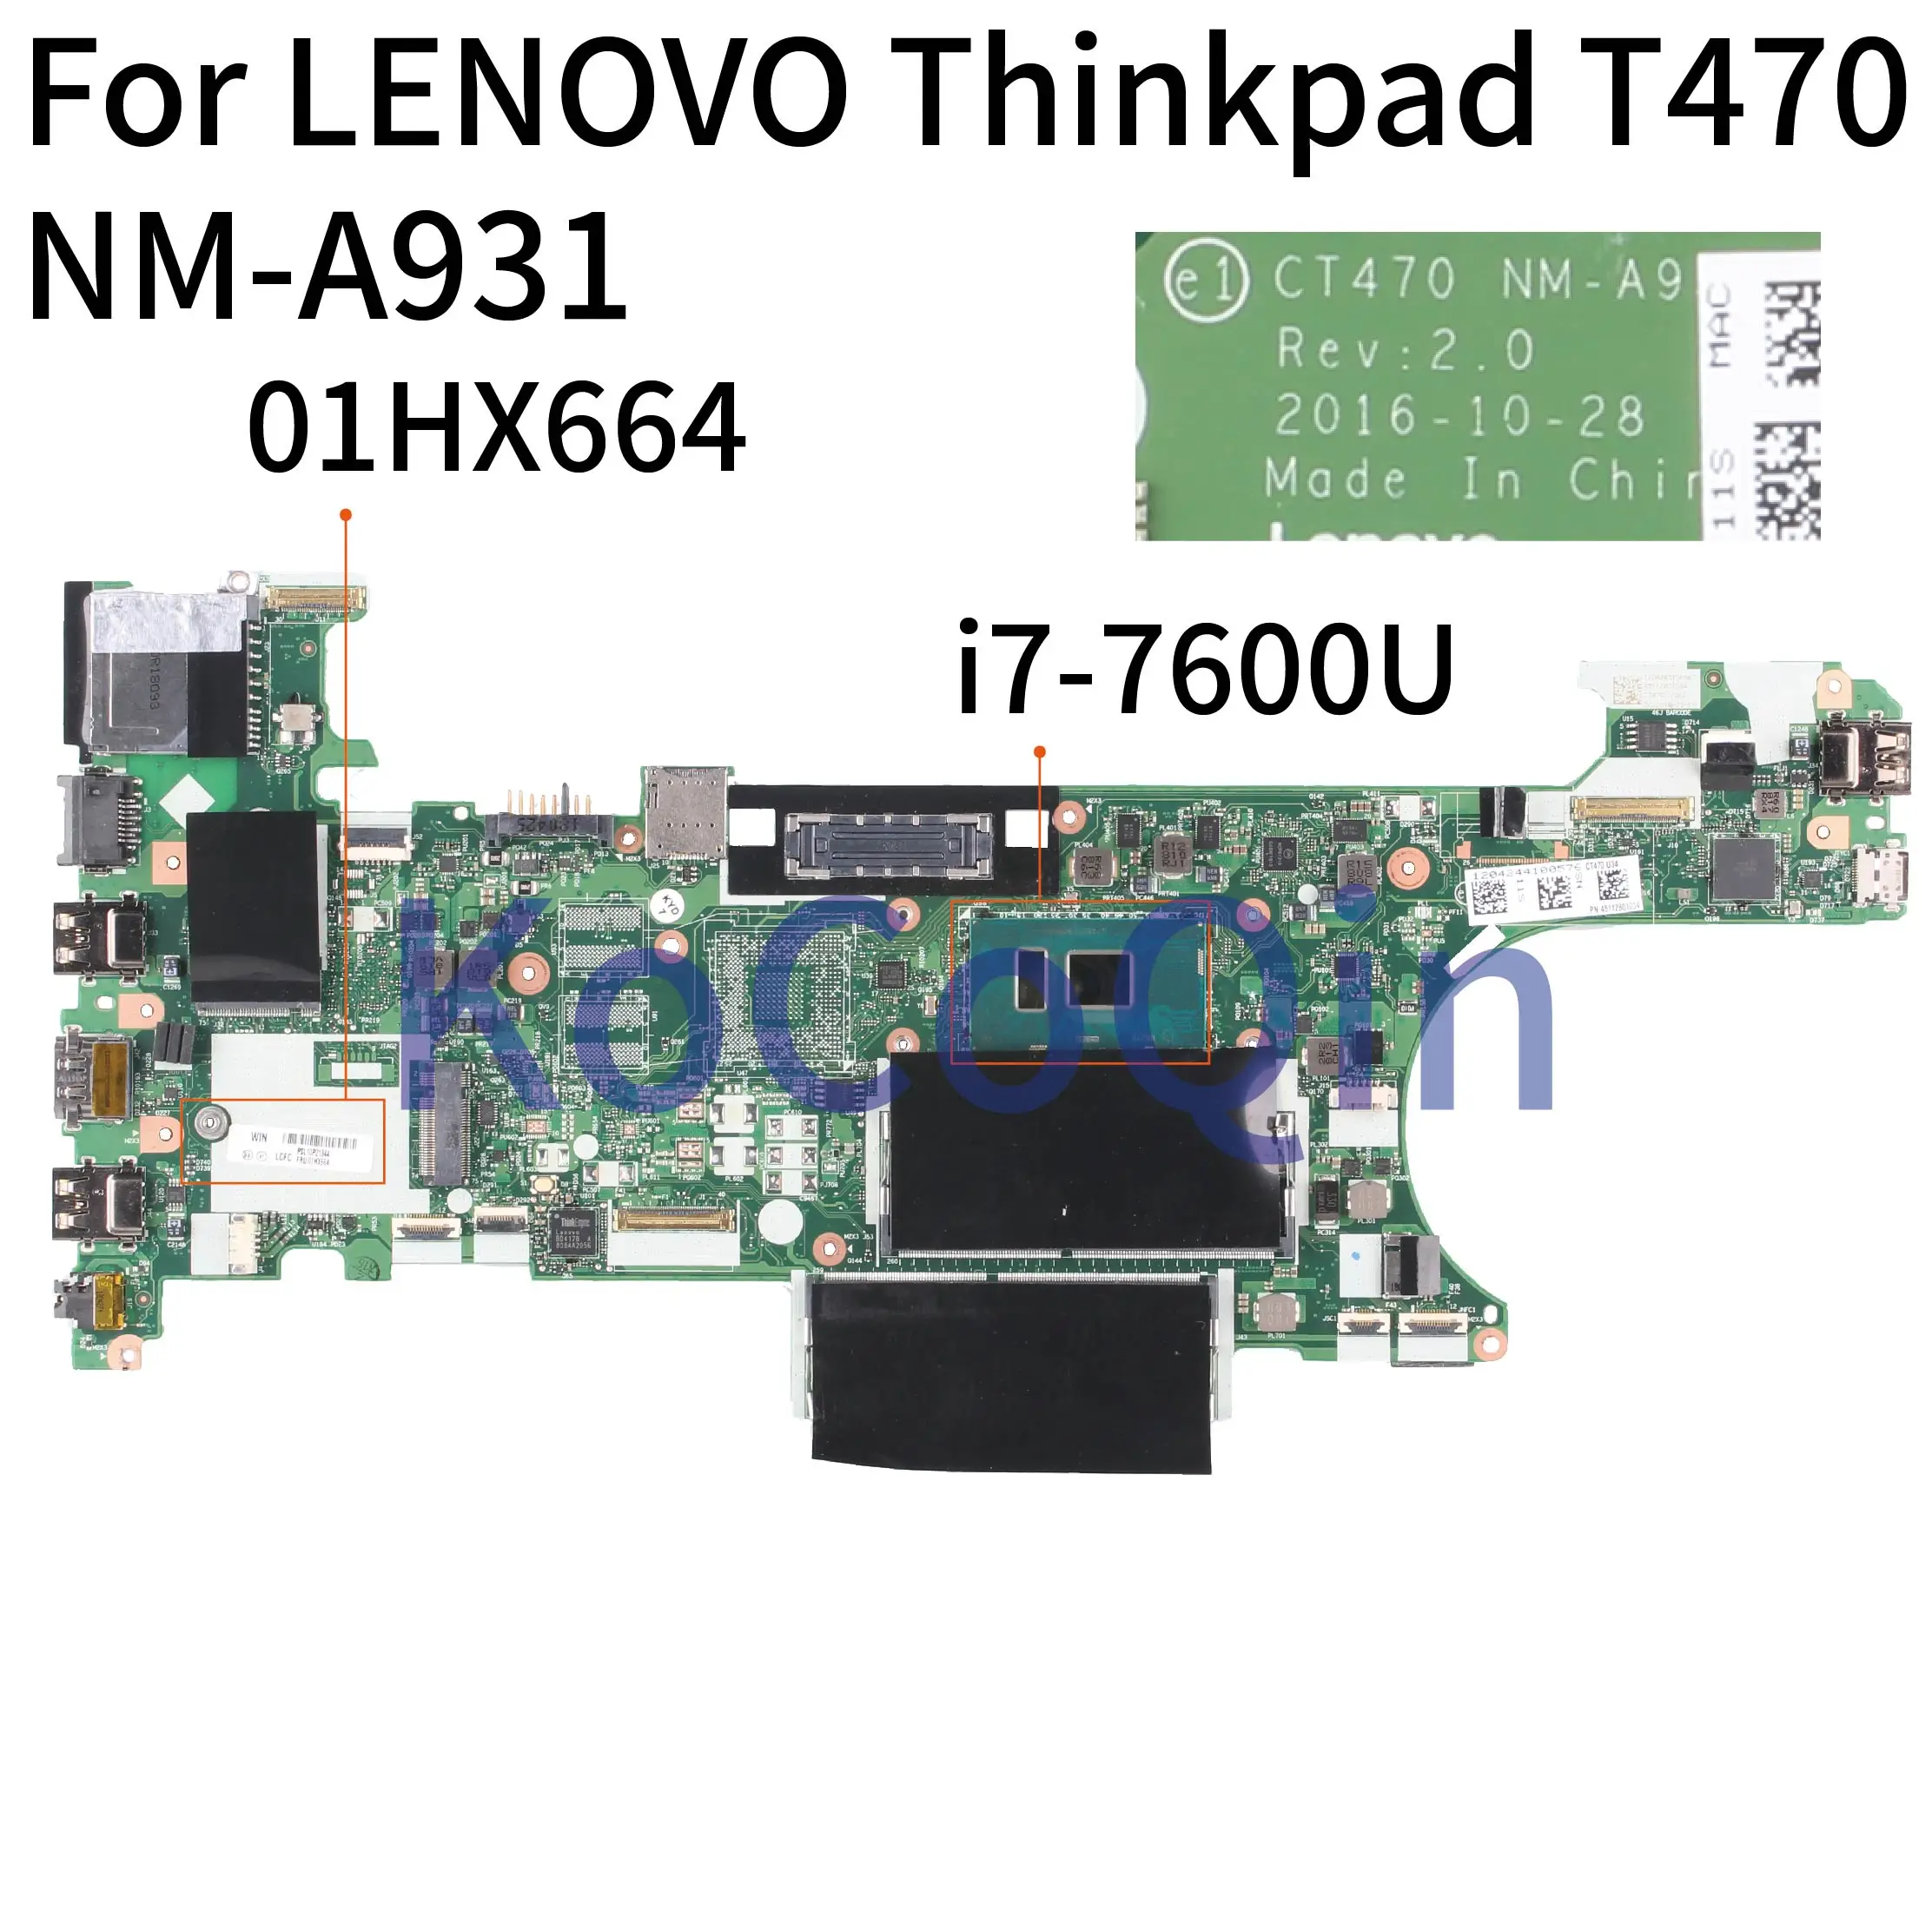 

KoCoQin Laptop motherboard For LENOVO Thinkpad T470 Core SR33Z i7-7600U Mainboard 01HX664 NM-A931 Tested 100%